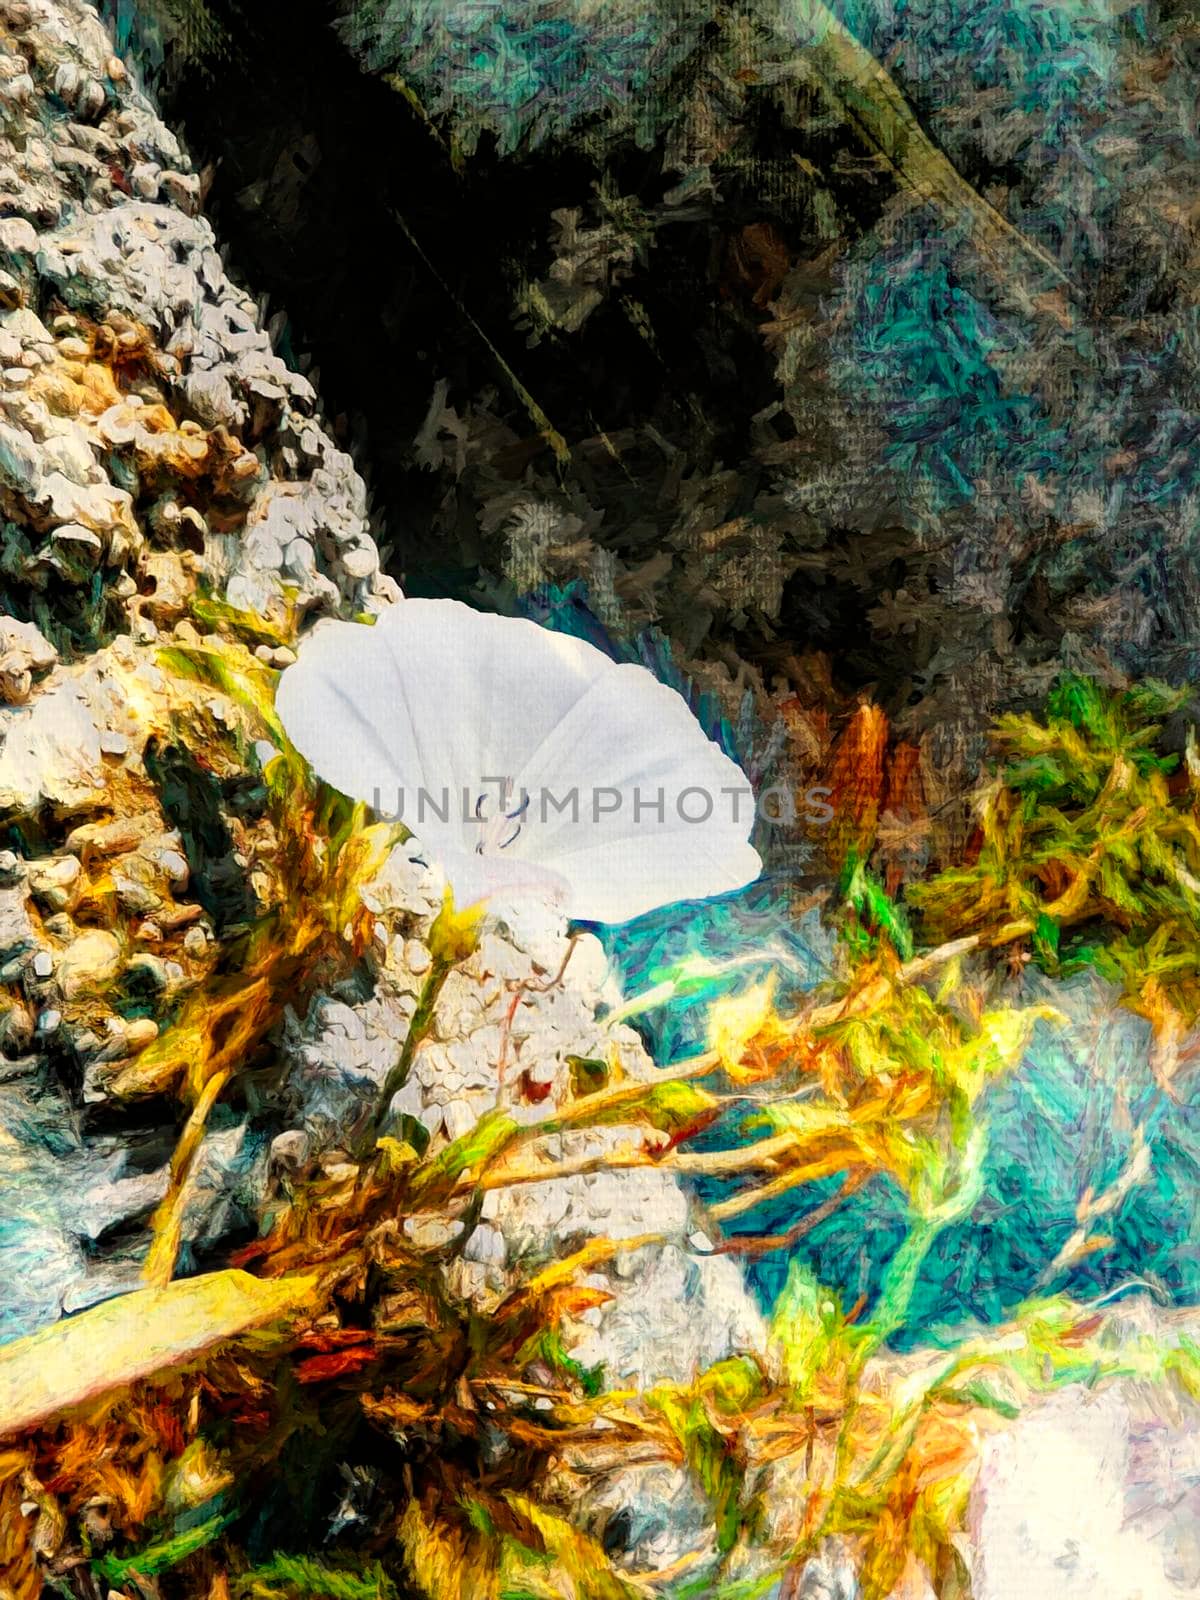 Digital painting of a white flower in the rock by ankarb